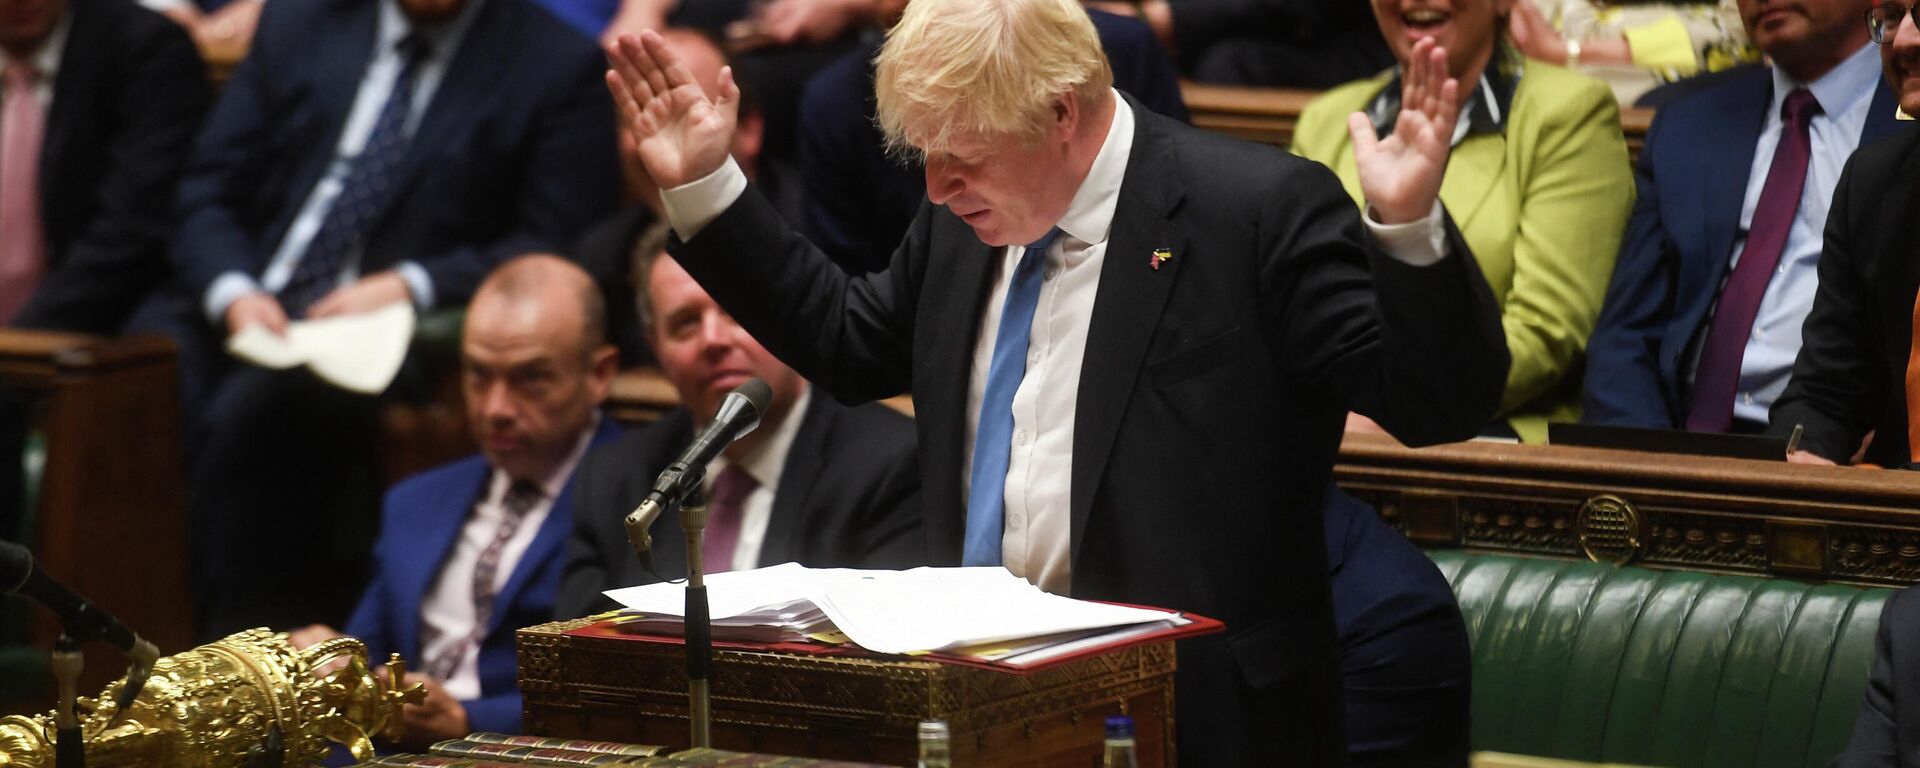 A handout photograph released by the UK Parliament shows Britain's Prime Minister Boris Johnson speaking during his final Prime Minister's Questions (PMQs) at the House of Commons in London on July 20, 2022 - Sputnik International, 1920, 09.08.2022